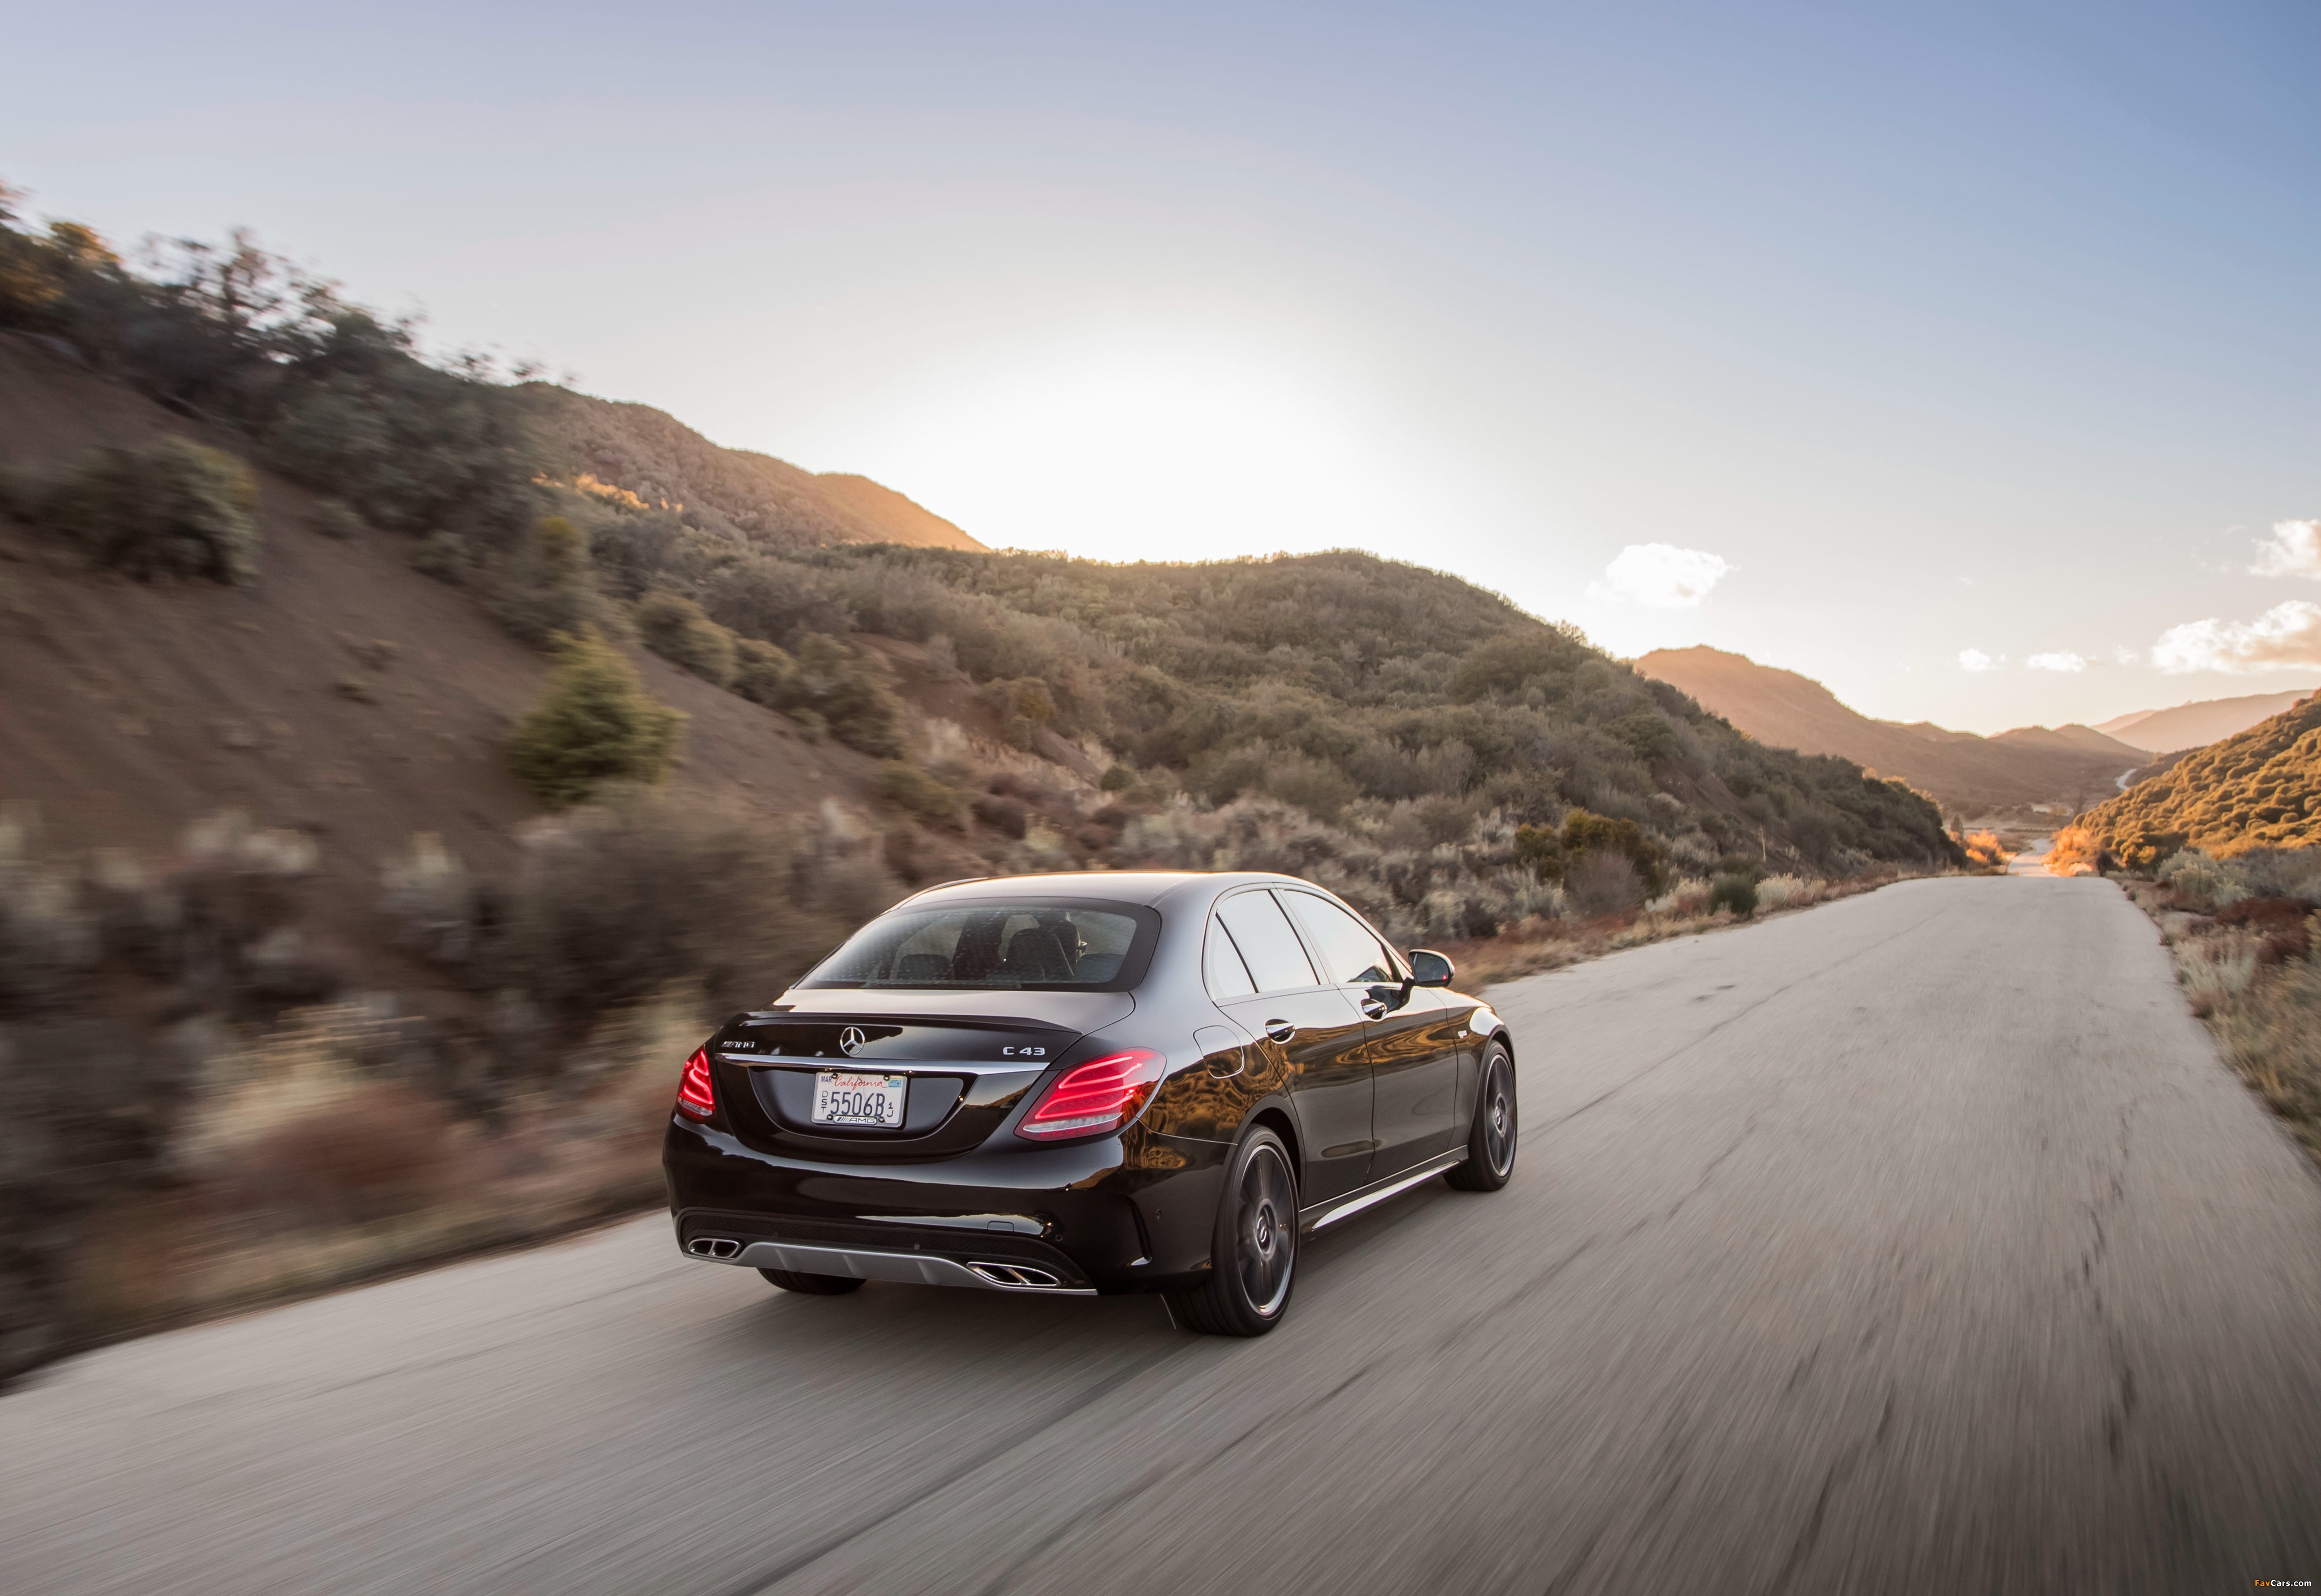 Mercedes-AMG C 43 4MATIC North America (W205) 2016 pictures (4096 x 2817)